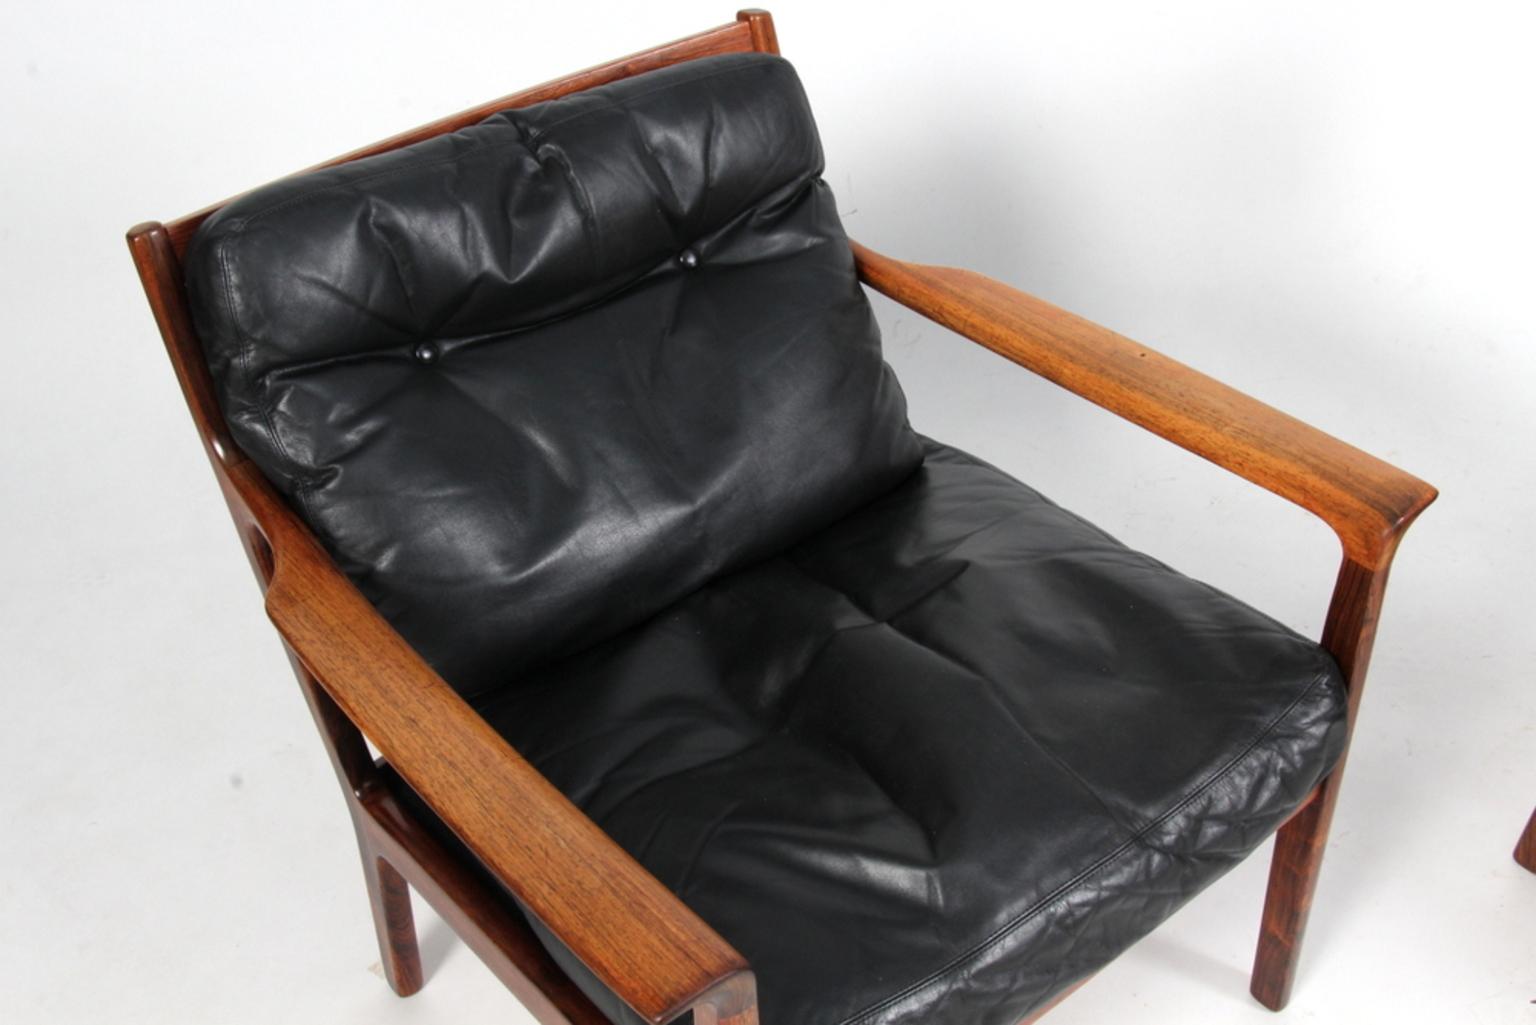 Fredrik Kayser elegant lounge chair in solid rosewood.

Original black leather cushions, back cushions with buttons. 

Made in Norway in the 1960s.